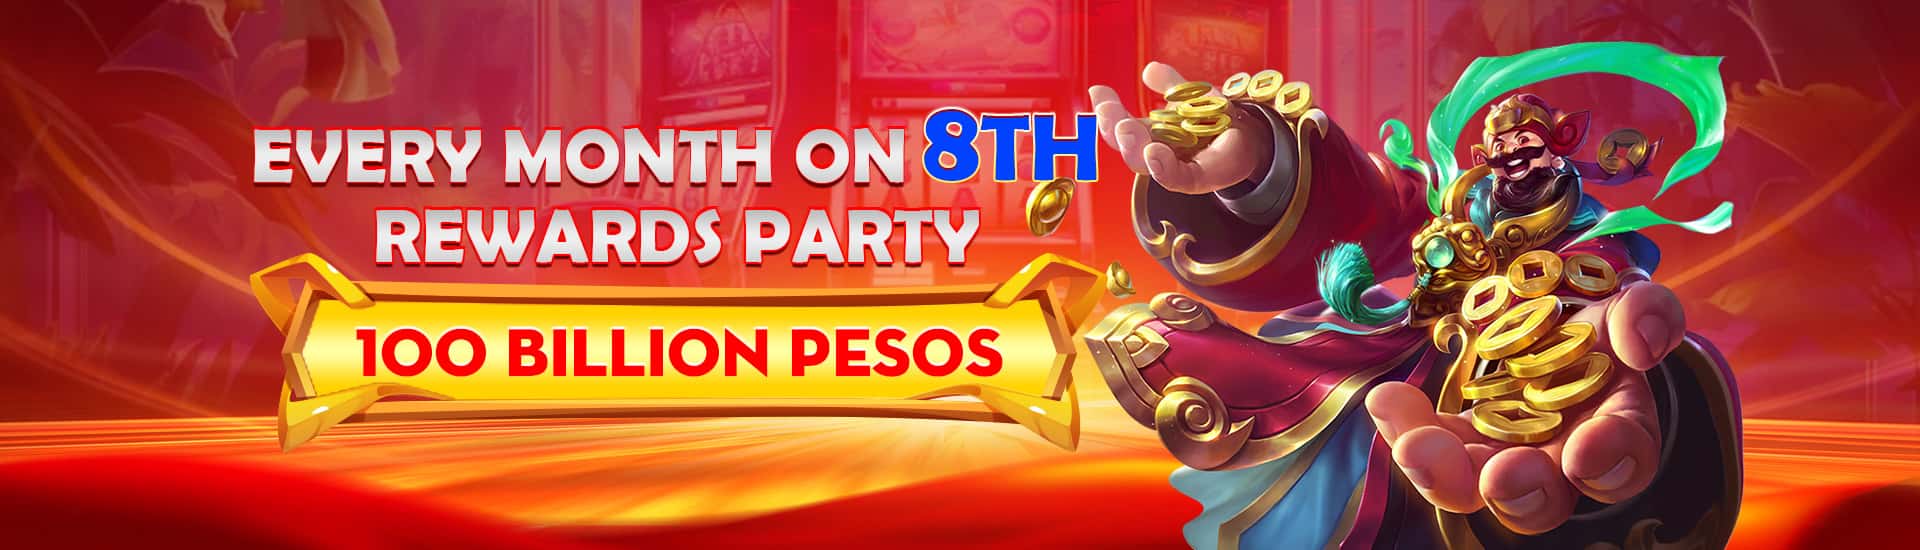 banner every month 8th rewards party